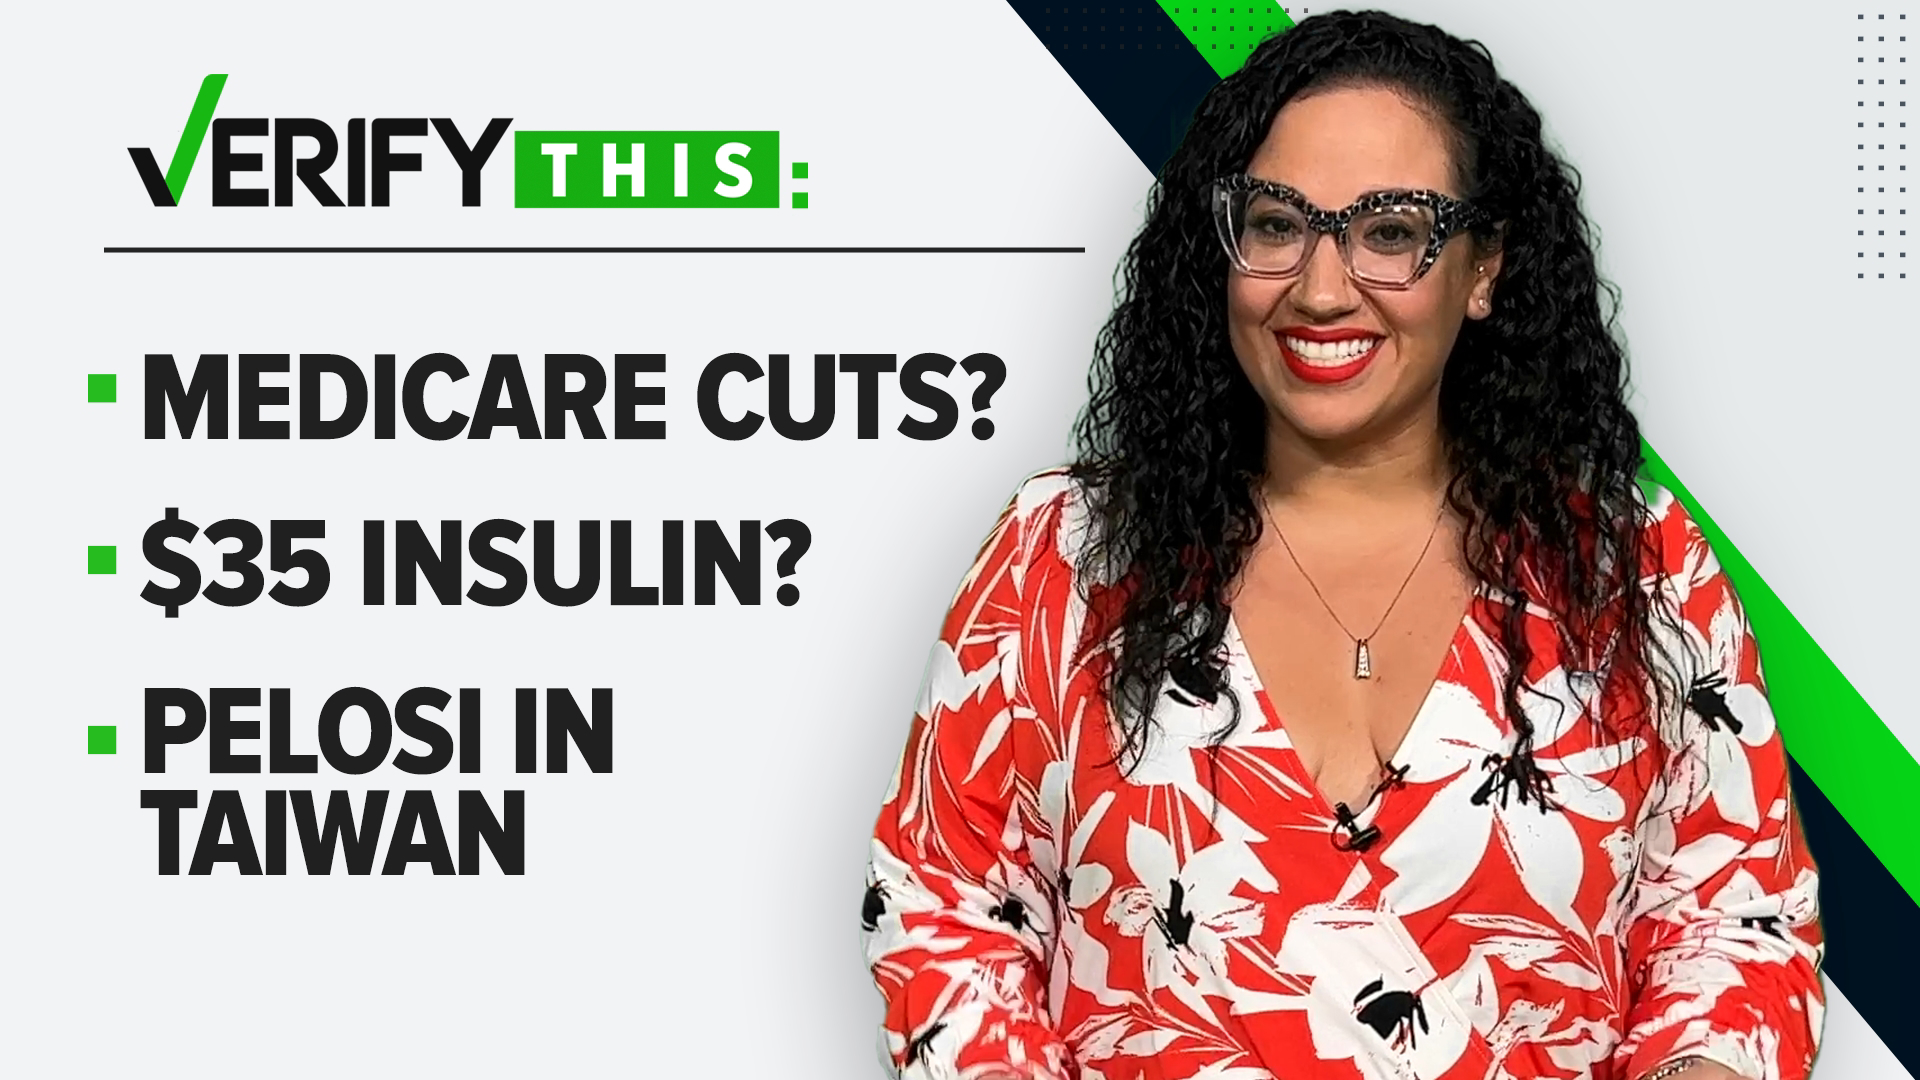 Finding answers to your questions about the chickenpox vaccine and monkeypox protection, Medicare cuts, $35 insulin for all, shading A/C units and more.